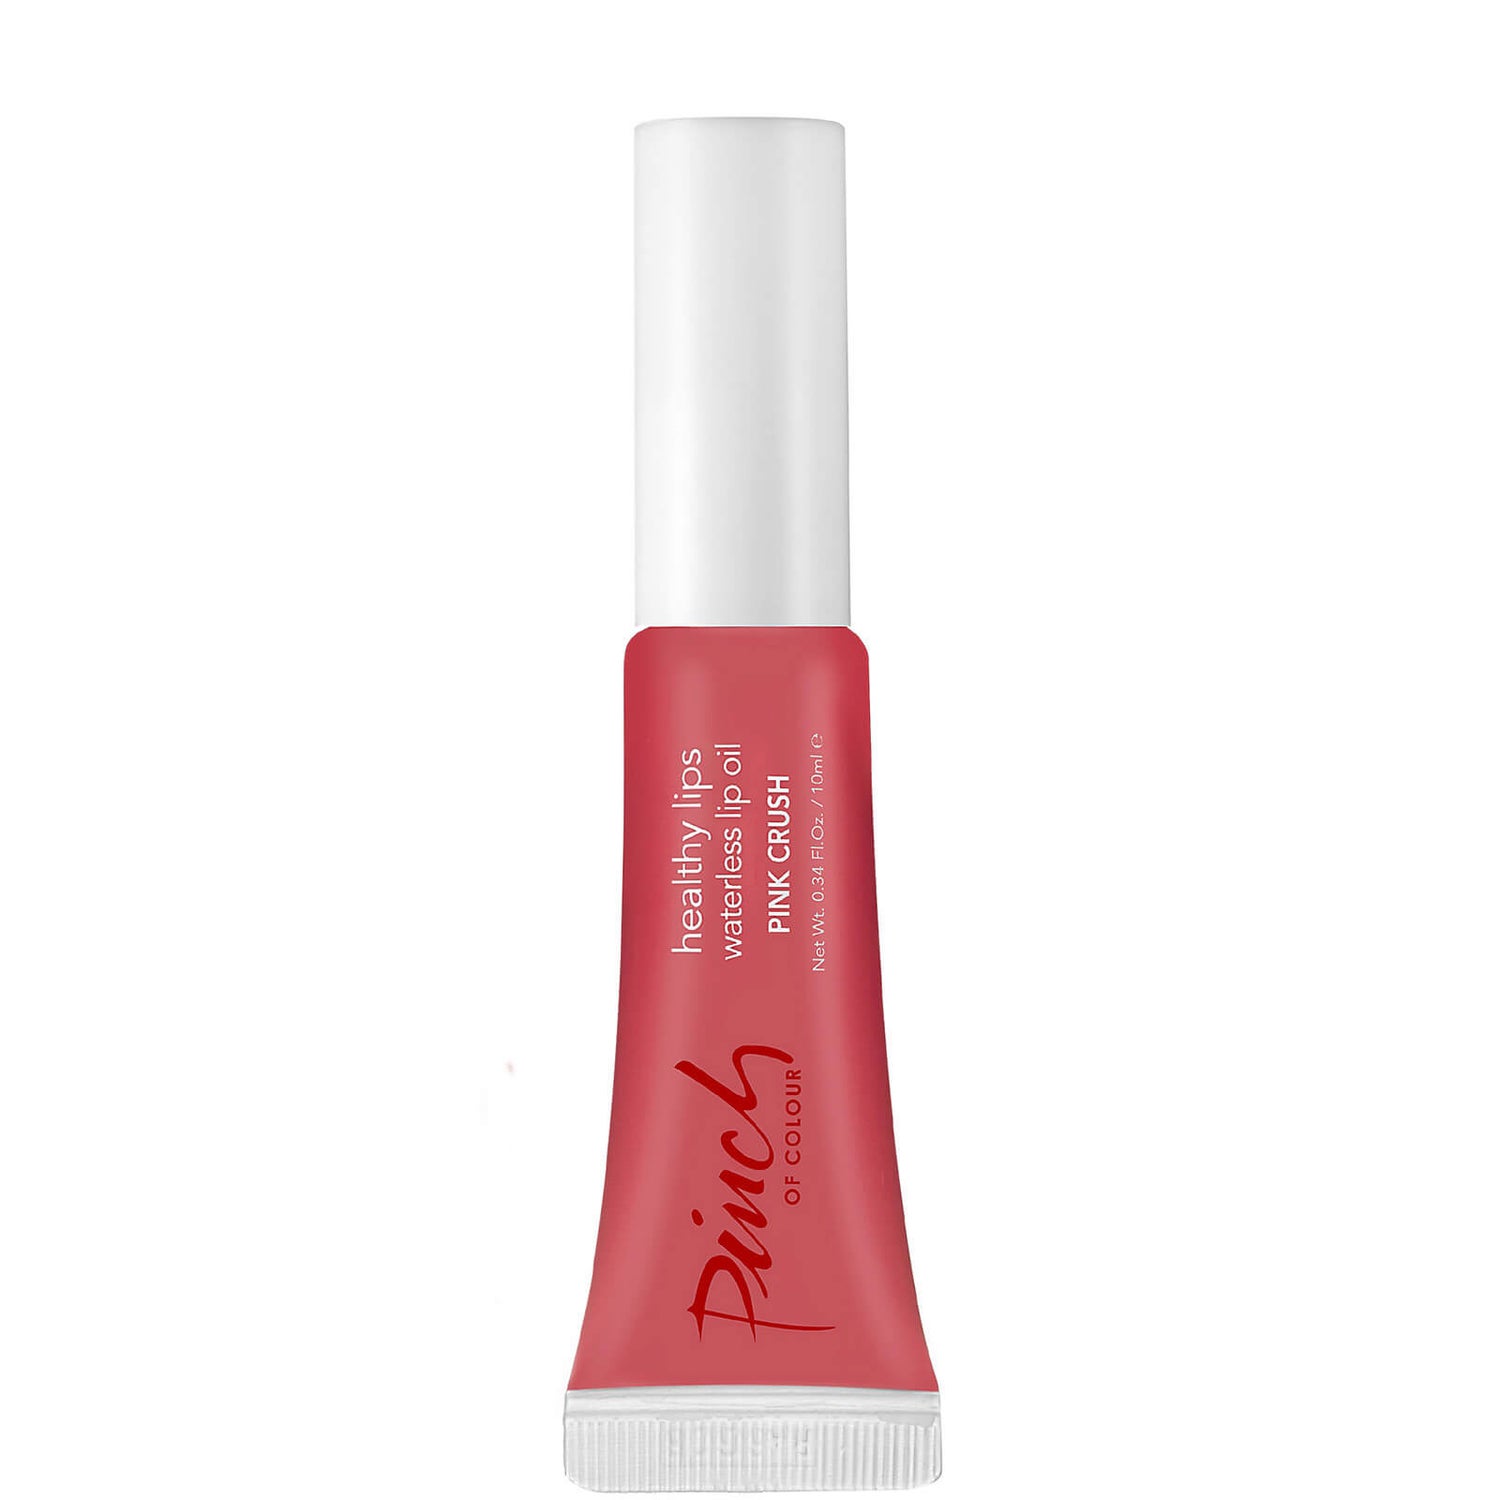 Pinch of Colour Healthy Lips Waterless Lip Oil